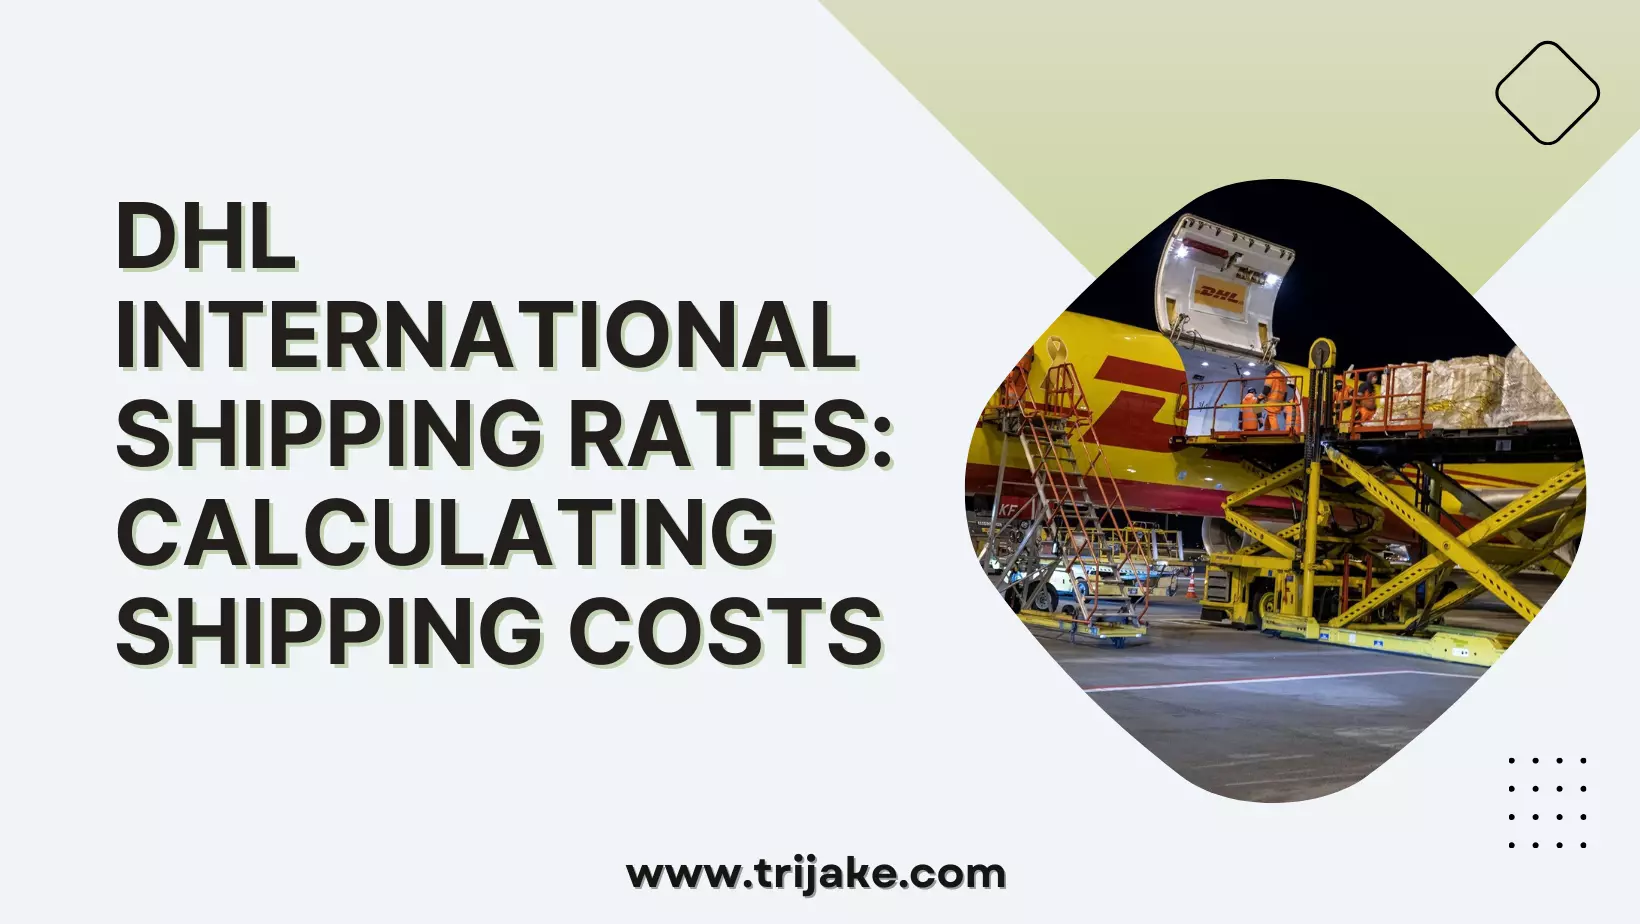 DHL International Shipping Rates Calculating Shipping Costs